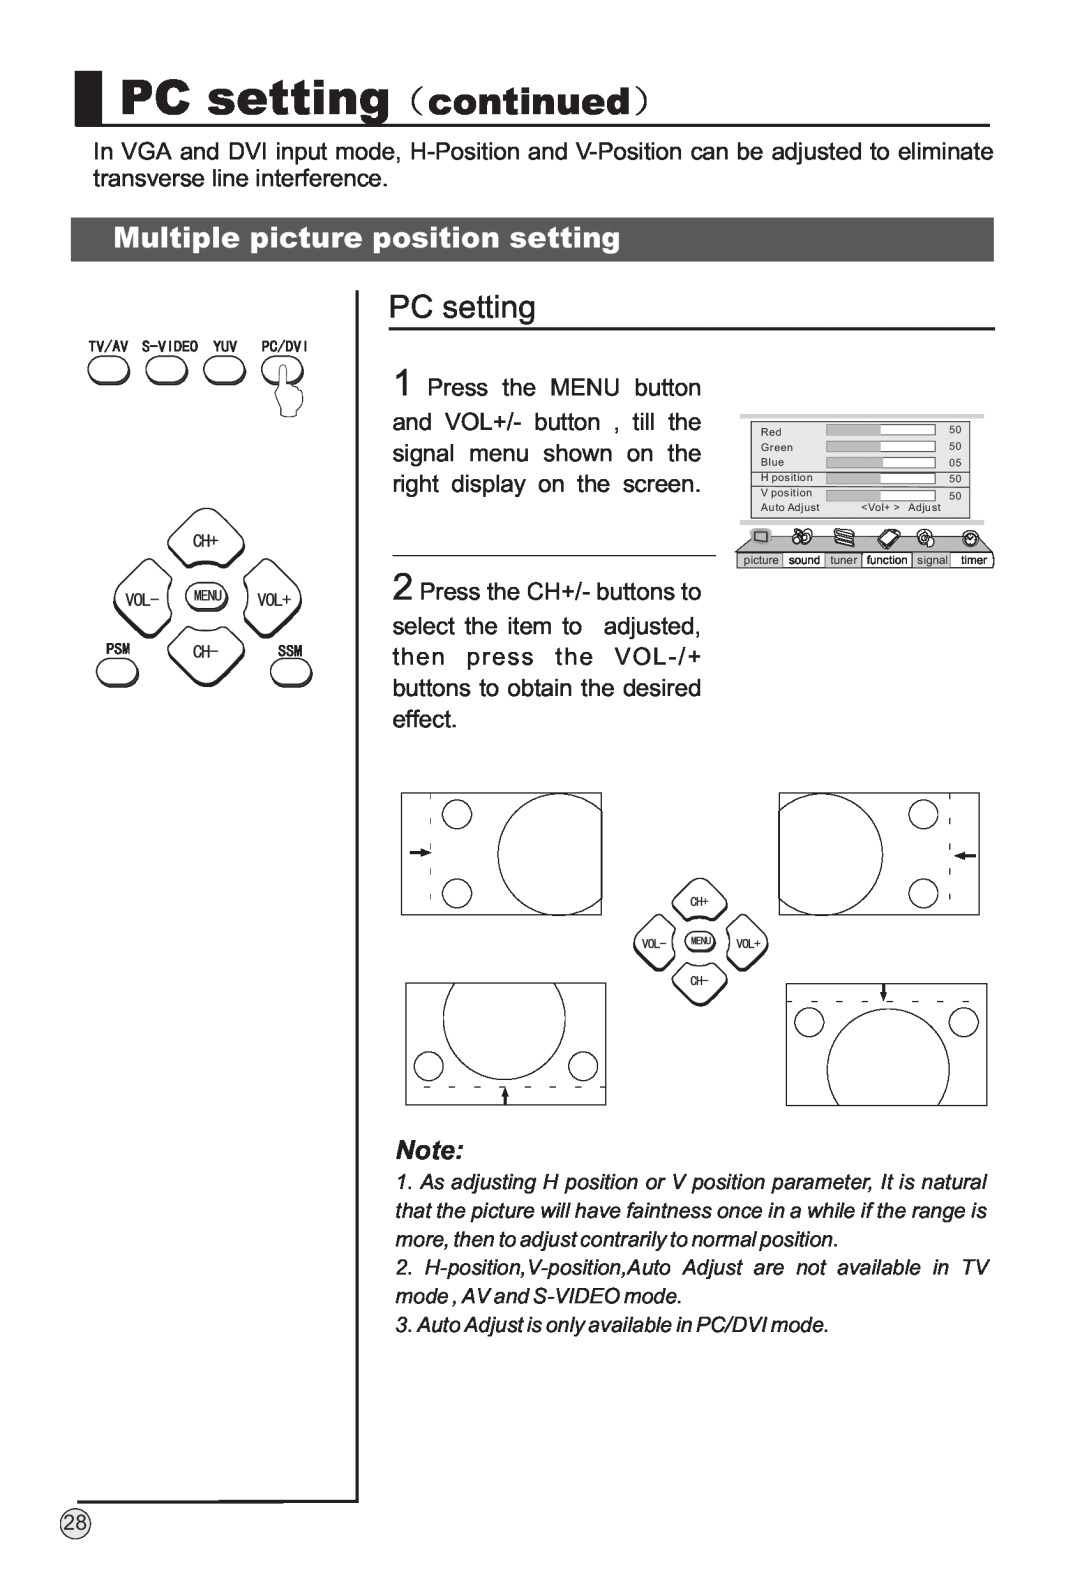 Haier P42SV6-C1 owner manual PC setting continued, Multiple picture position setting 